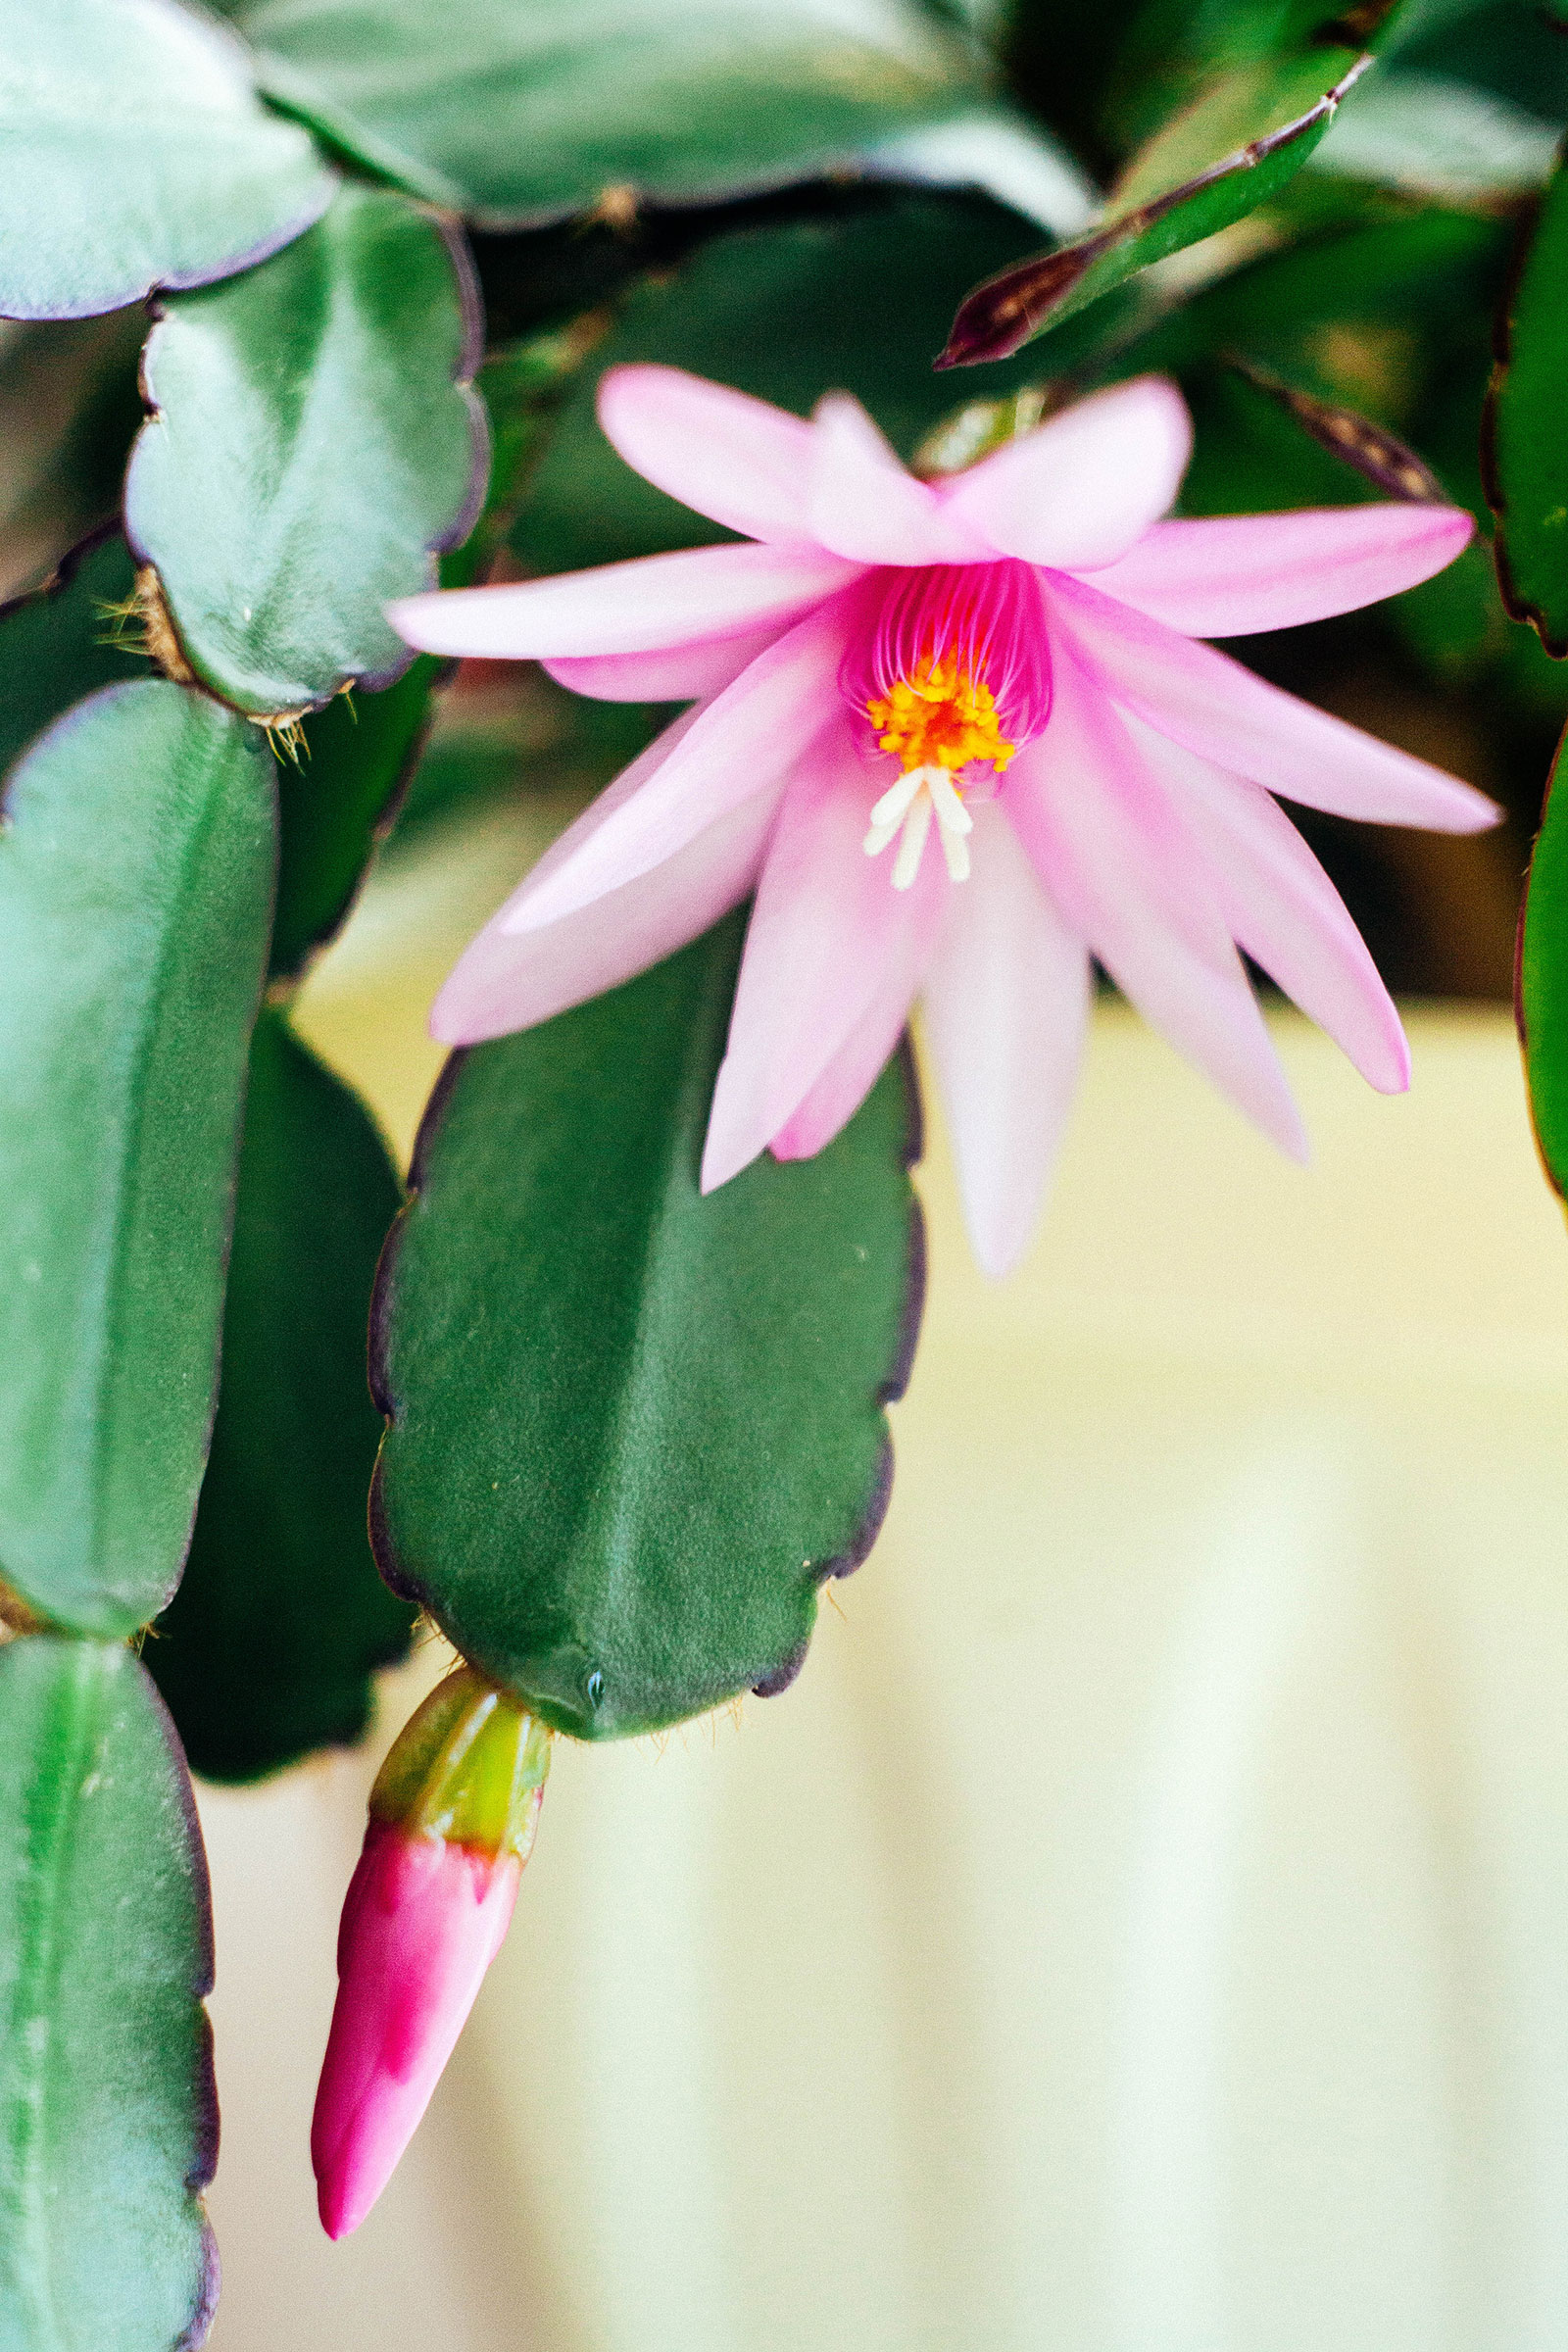 Close-up of holiday cactus houseplant with a pink flower and a pink flower bud